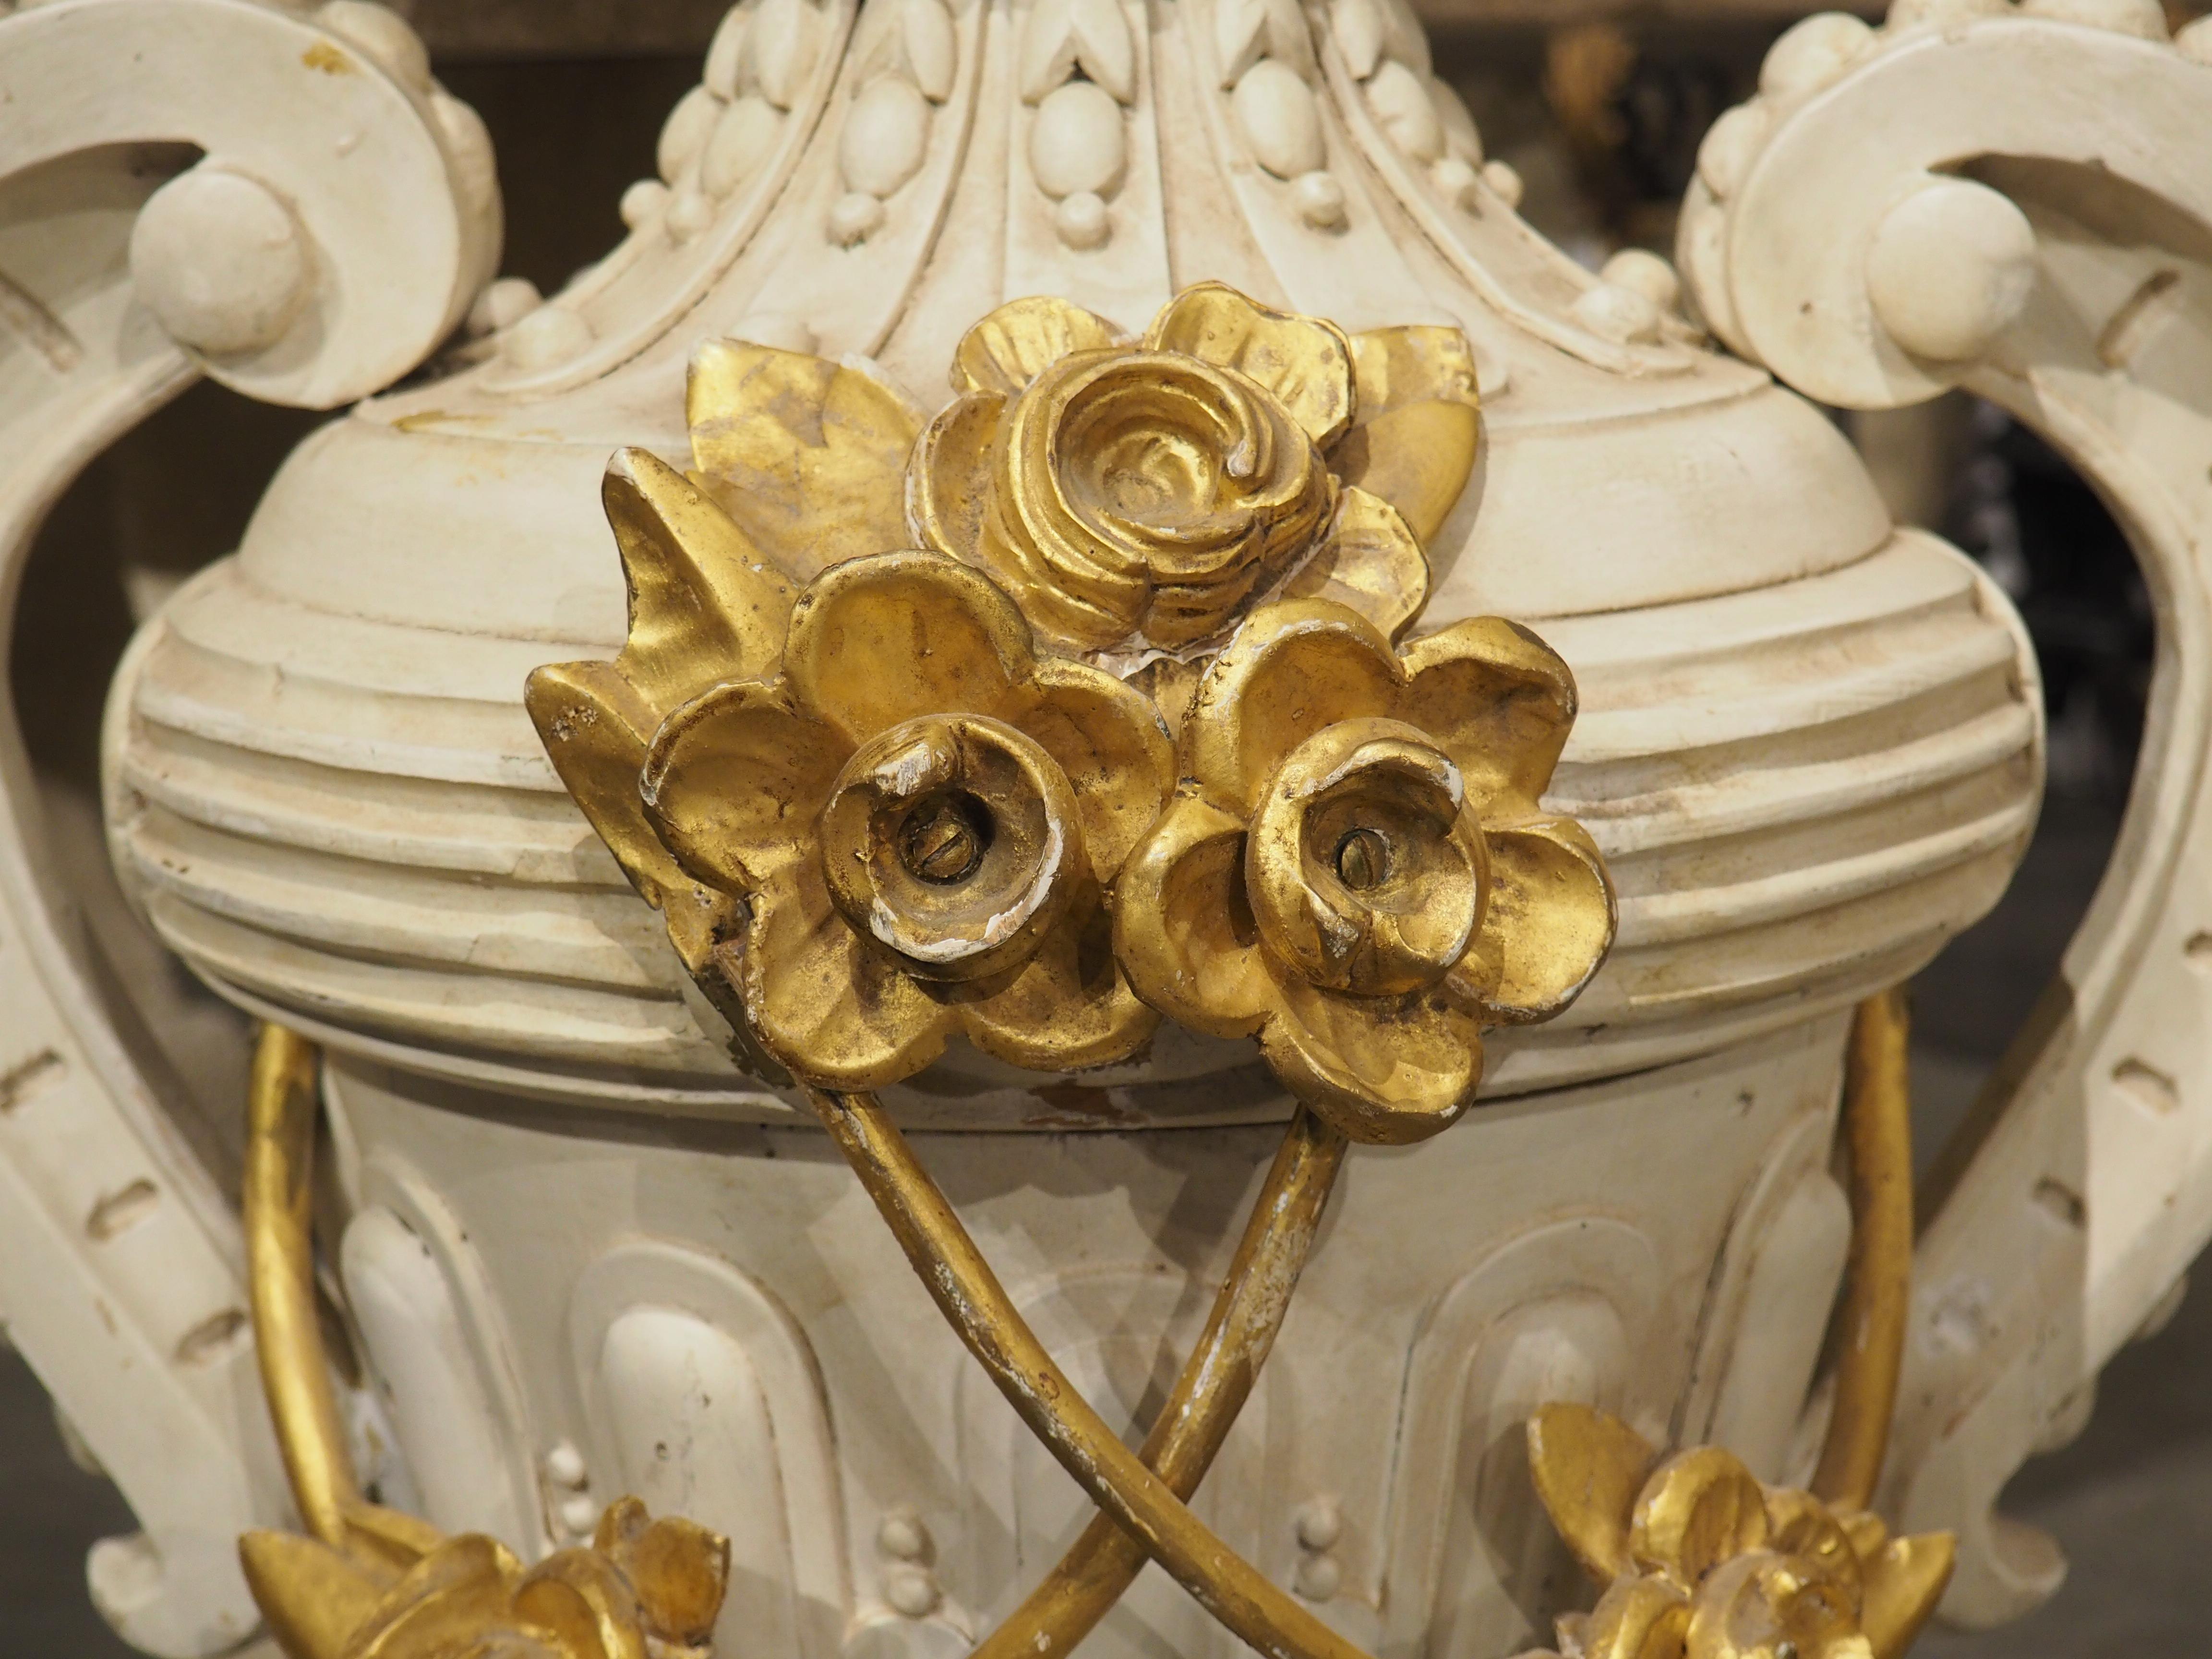 Hand-carved in Florence, Italy, in the 1800s, this tall wooden urn has been finished with a white lacquer and golden elements inspired by nature. A golden fruit bouquet arises from the top, above a neck adorned with beading and widely spaced fluting